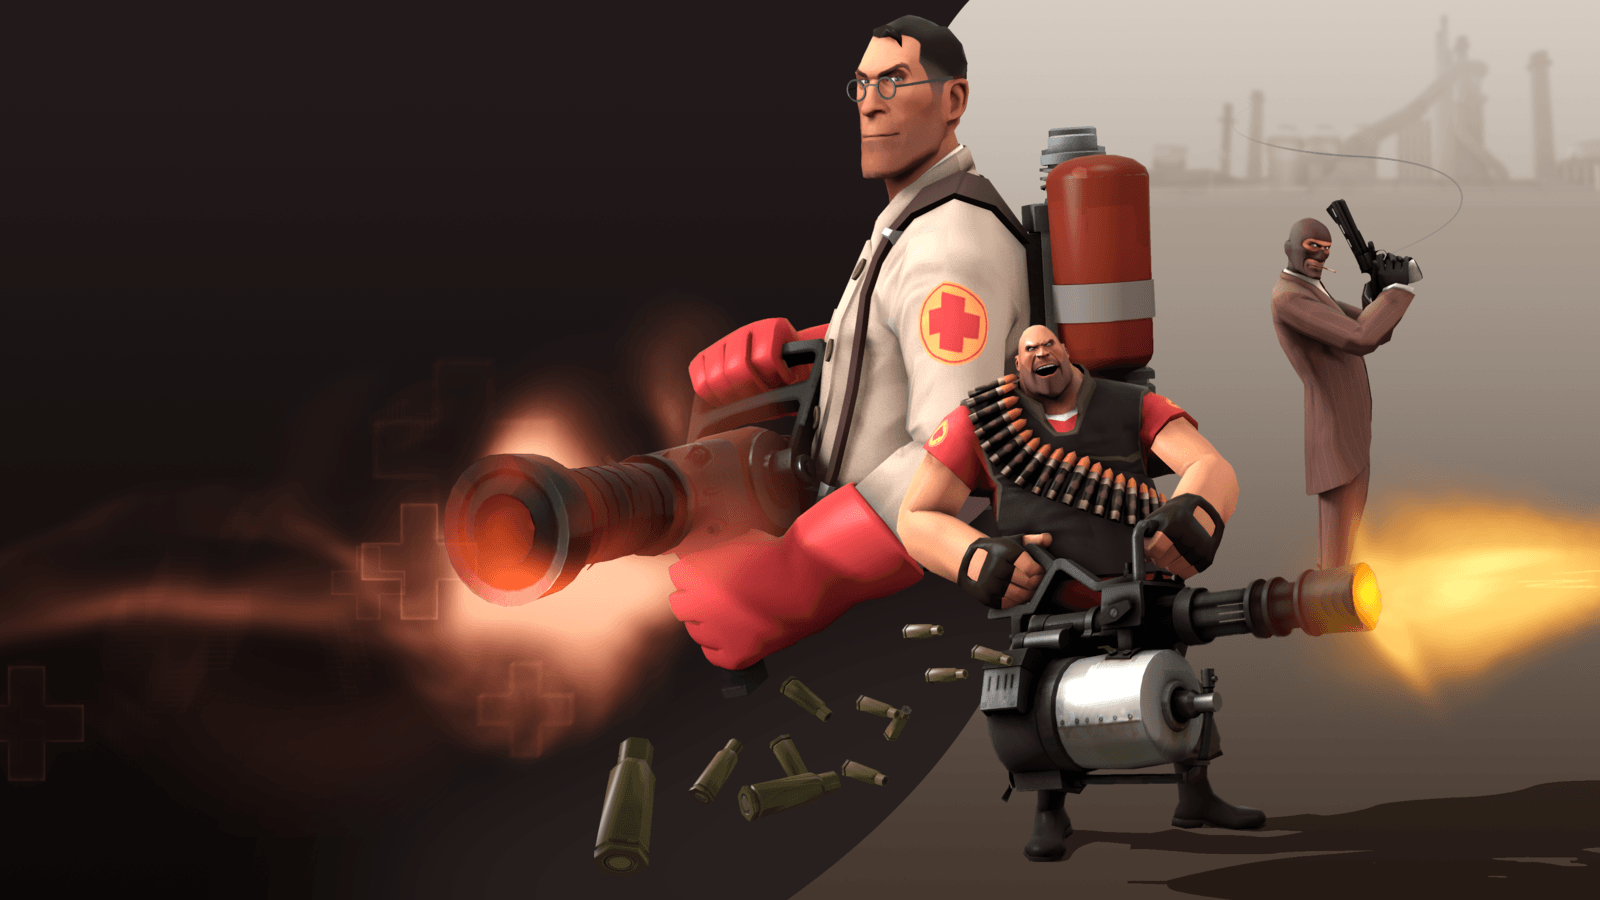 TF2 Loading Screen With RED Medic, Heavy and Spy Fortress 2(TF2) Photo